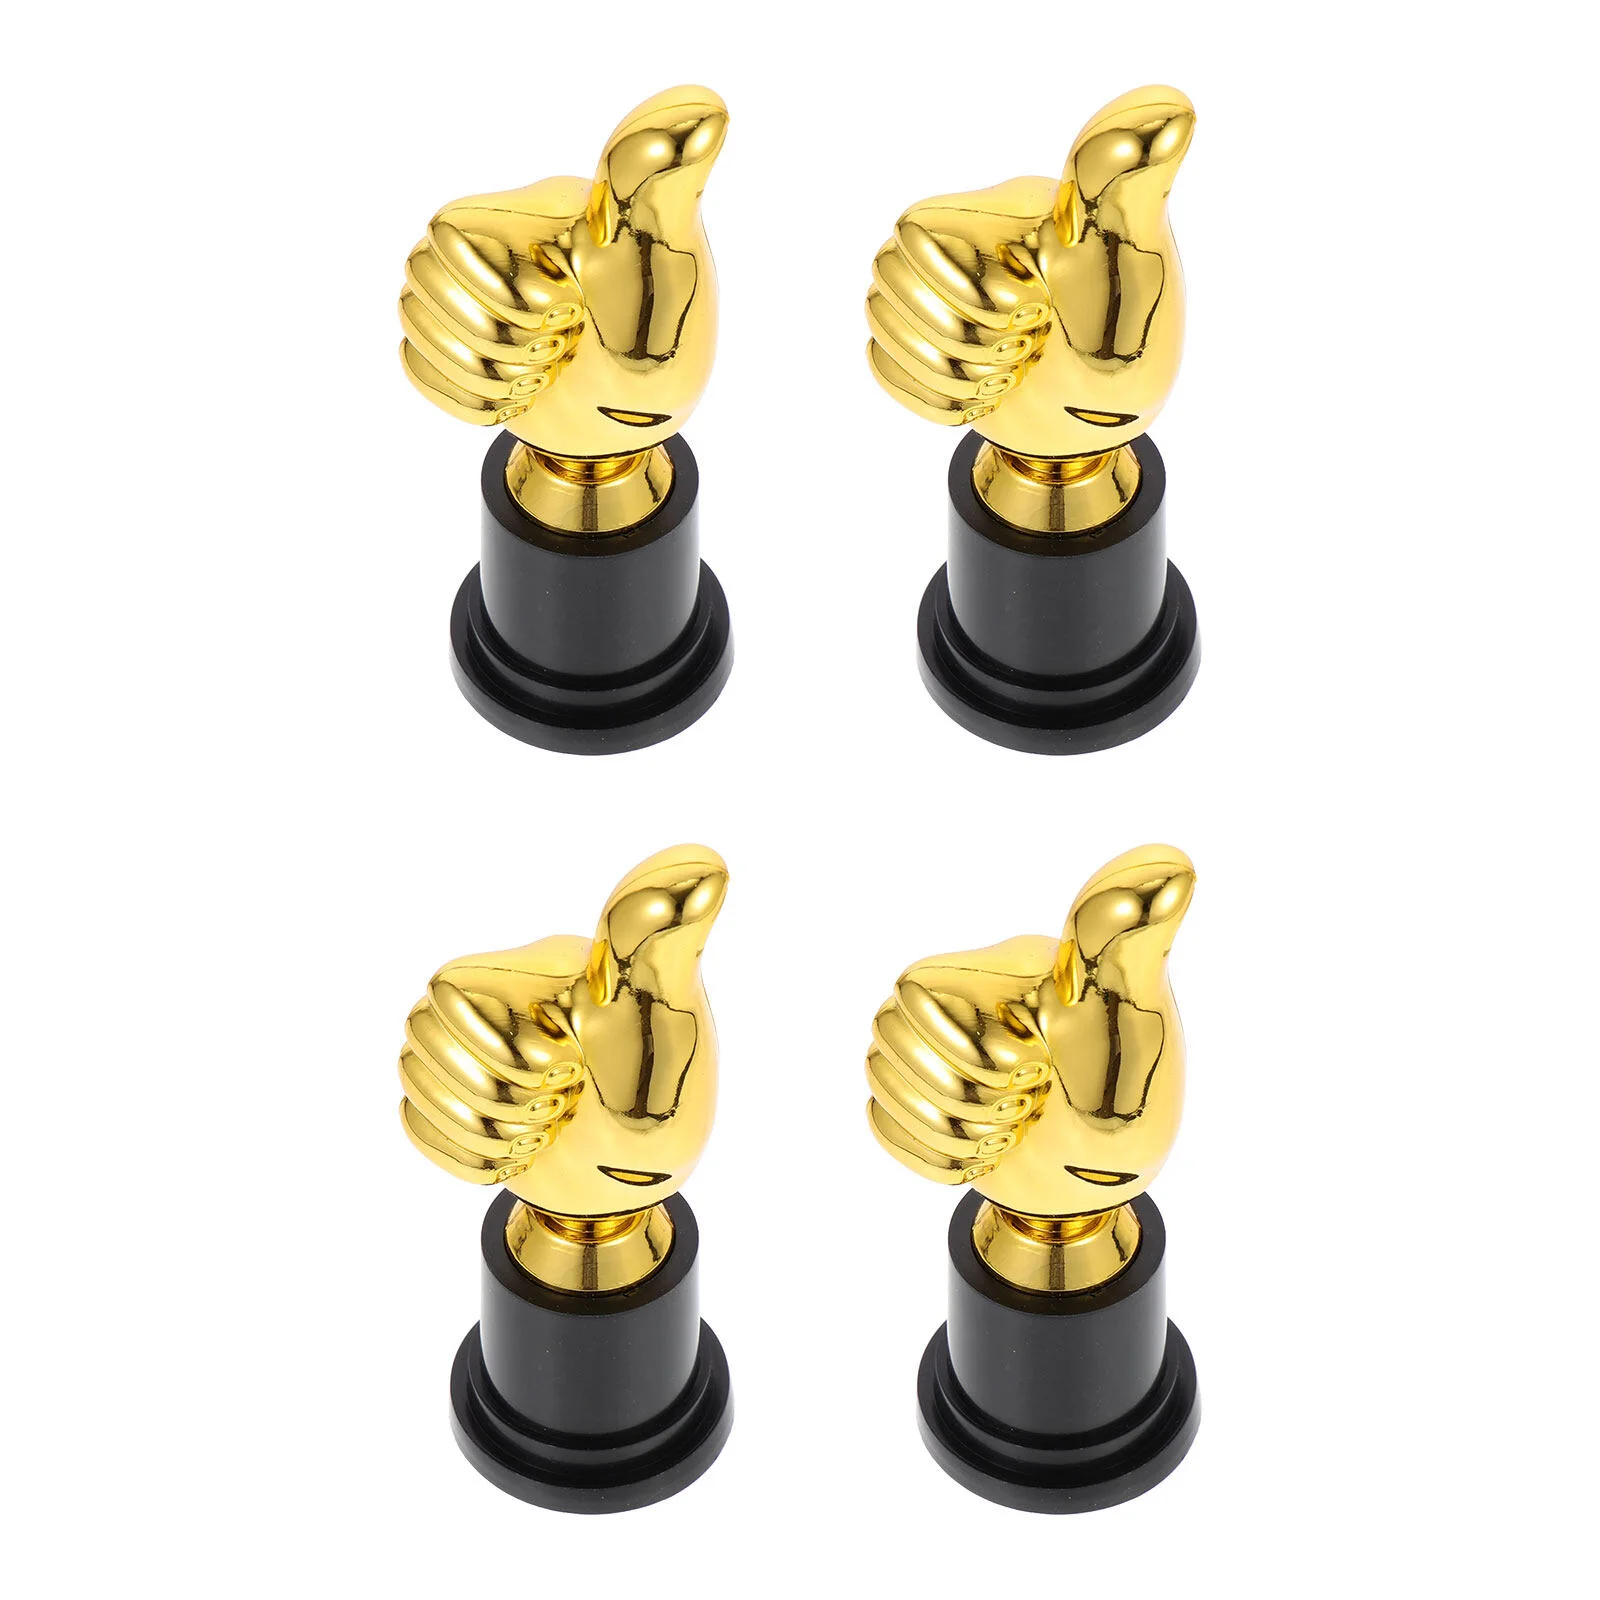 

4 Pcs Kids Awesome Trophy Baseball Trophies Thumb Model Gold Decor Competition Plastic Encouragement Student Awards Prizes